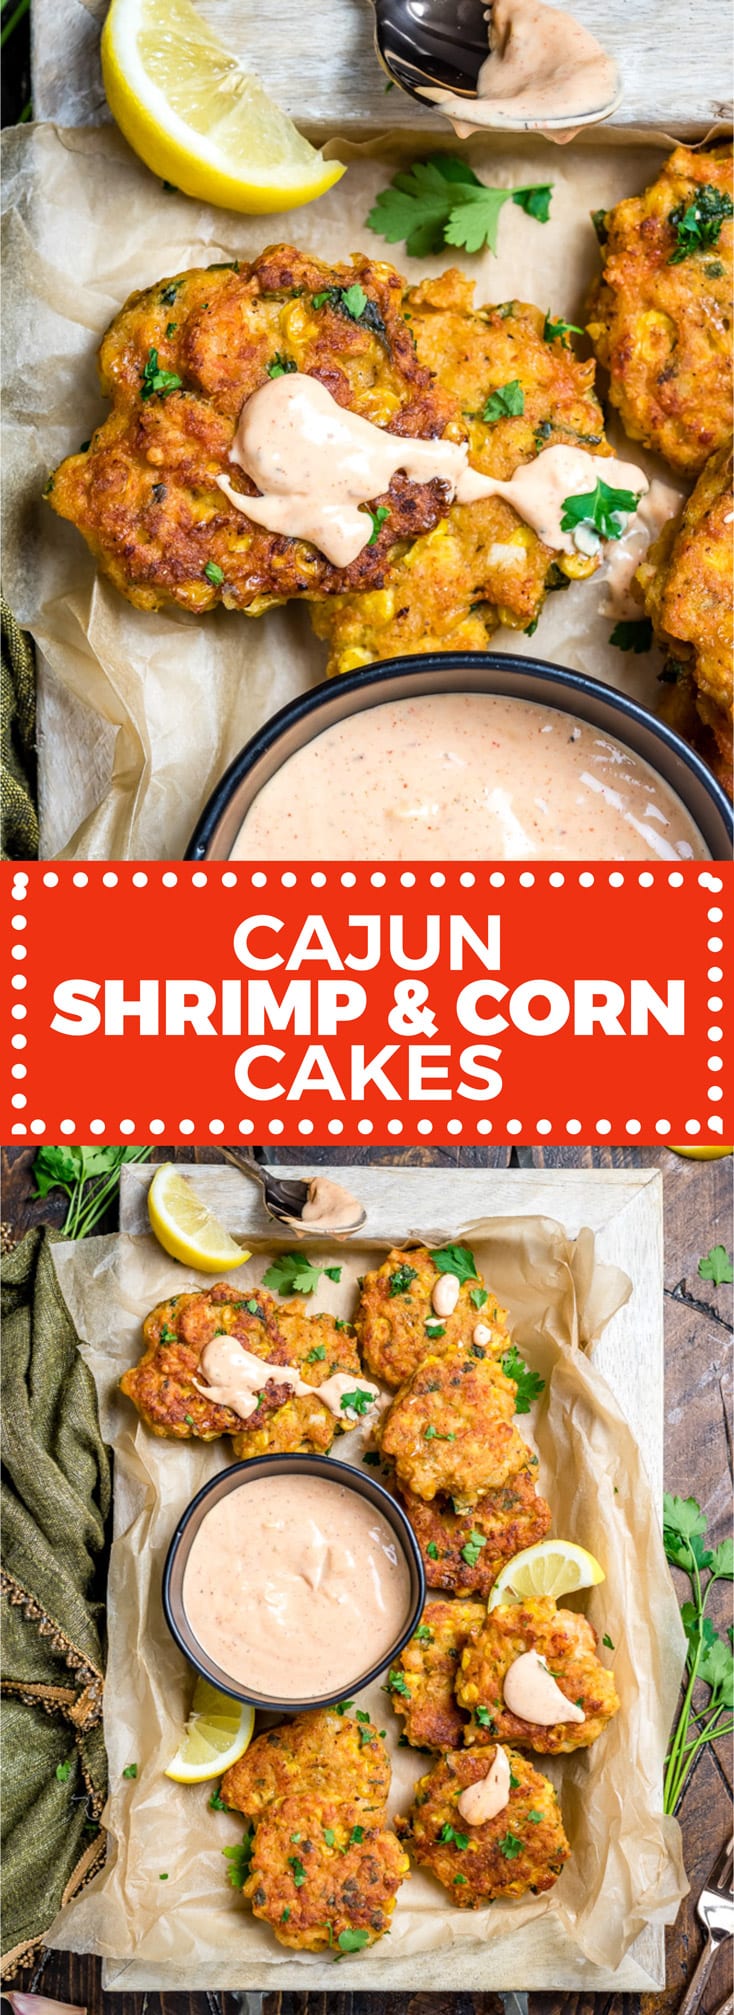 These Cajun Shrimp and Corn Cakes take just 20 minutes to make and even less time to fly off the plate. They're the perfect treat for seafood lovers, whether they're served for a Mardi Gras dinner, as a party appetizer, or simply on toasted buns with lettuce, onion, and remoulade. | hostthetoast.com